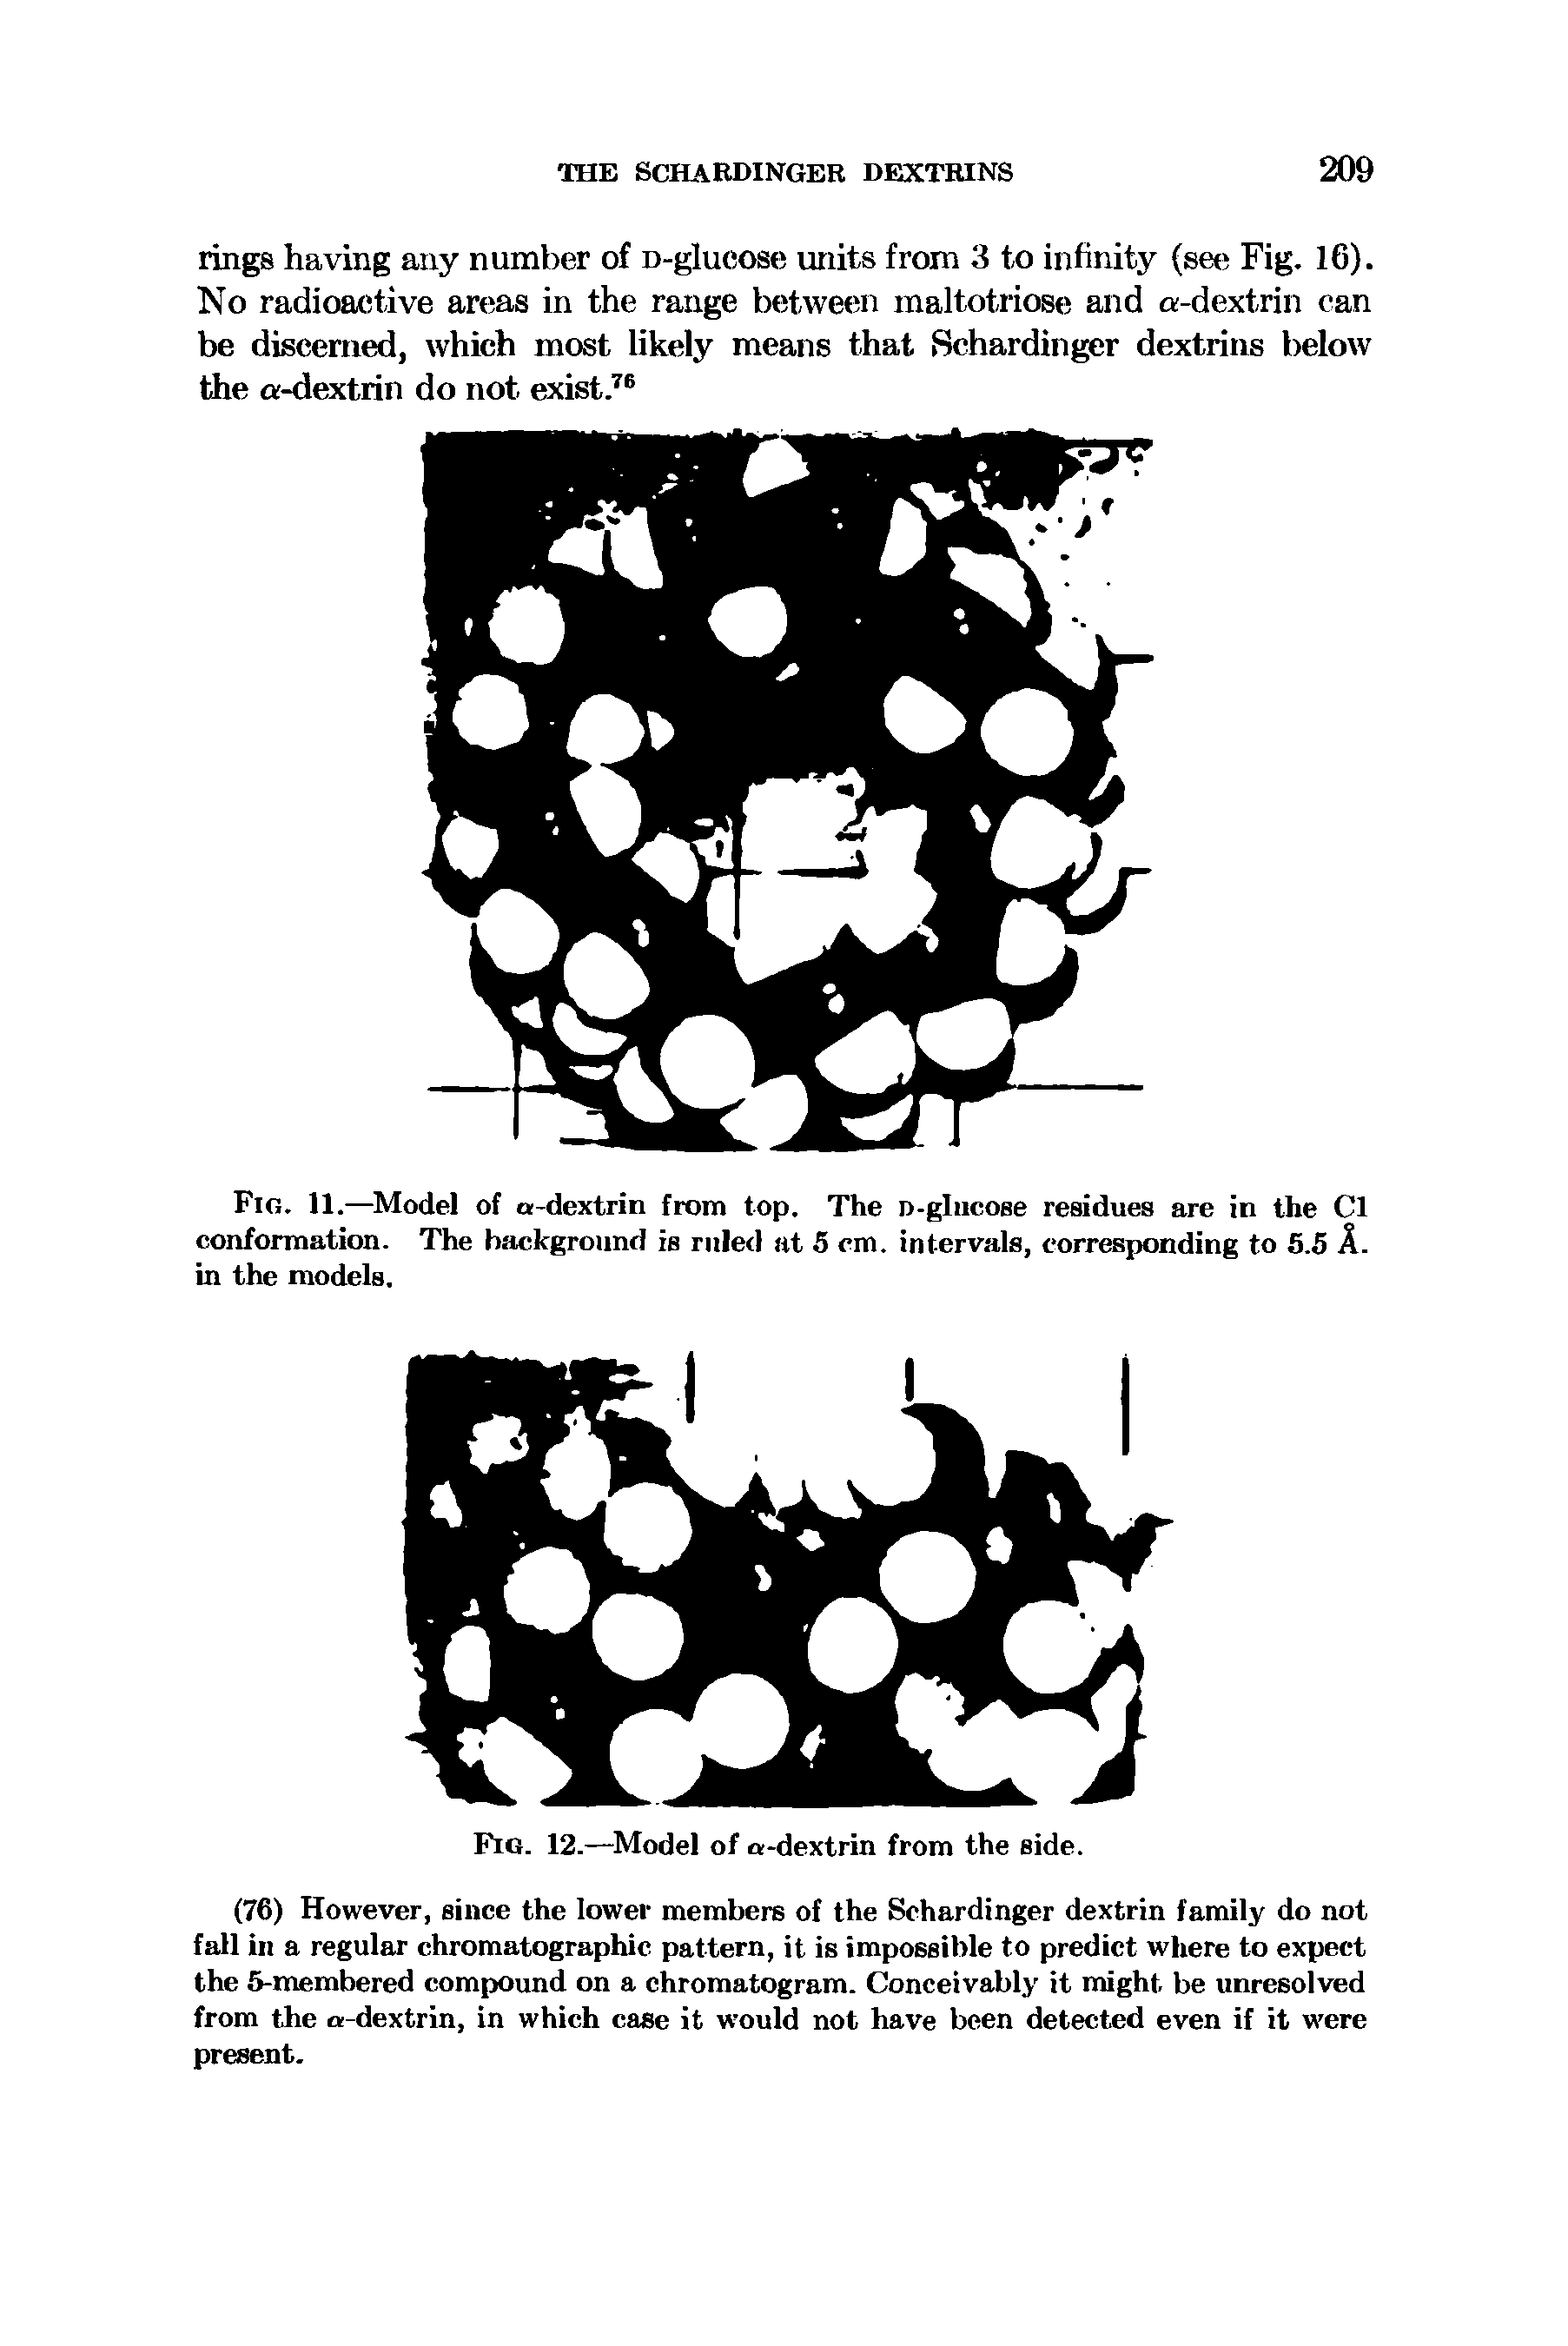 Fig. 11.—Model of a-dextrin from top. The D-gliicose residues are in the Cl conformation. The background is ruled at 5 cm. intervals, corresponding to 5.5 A. in the models.